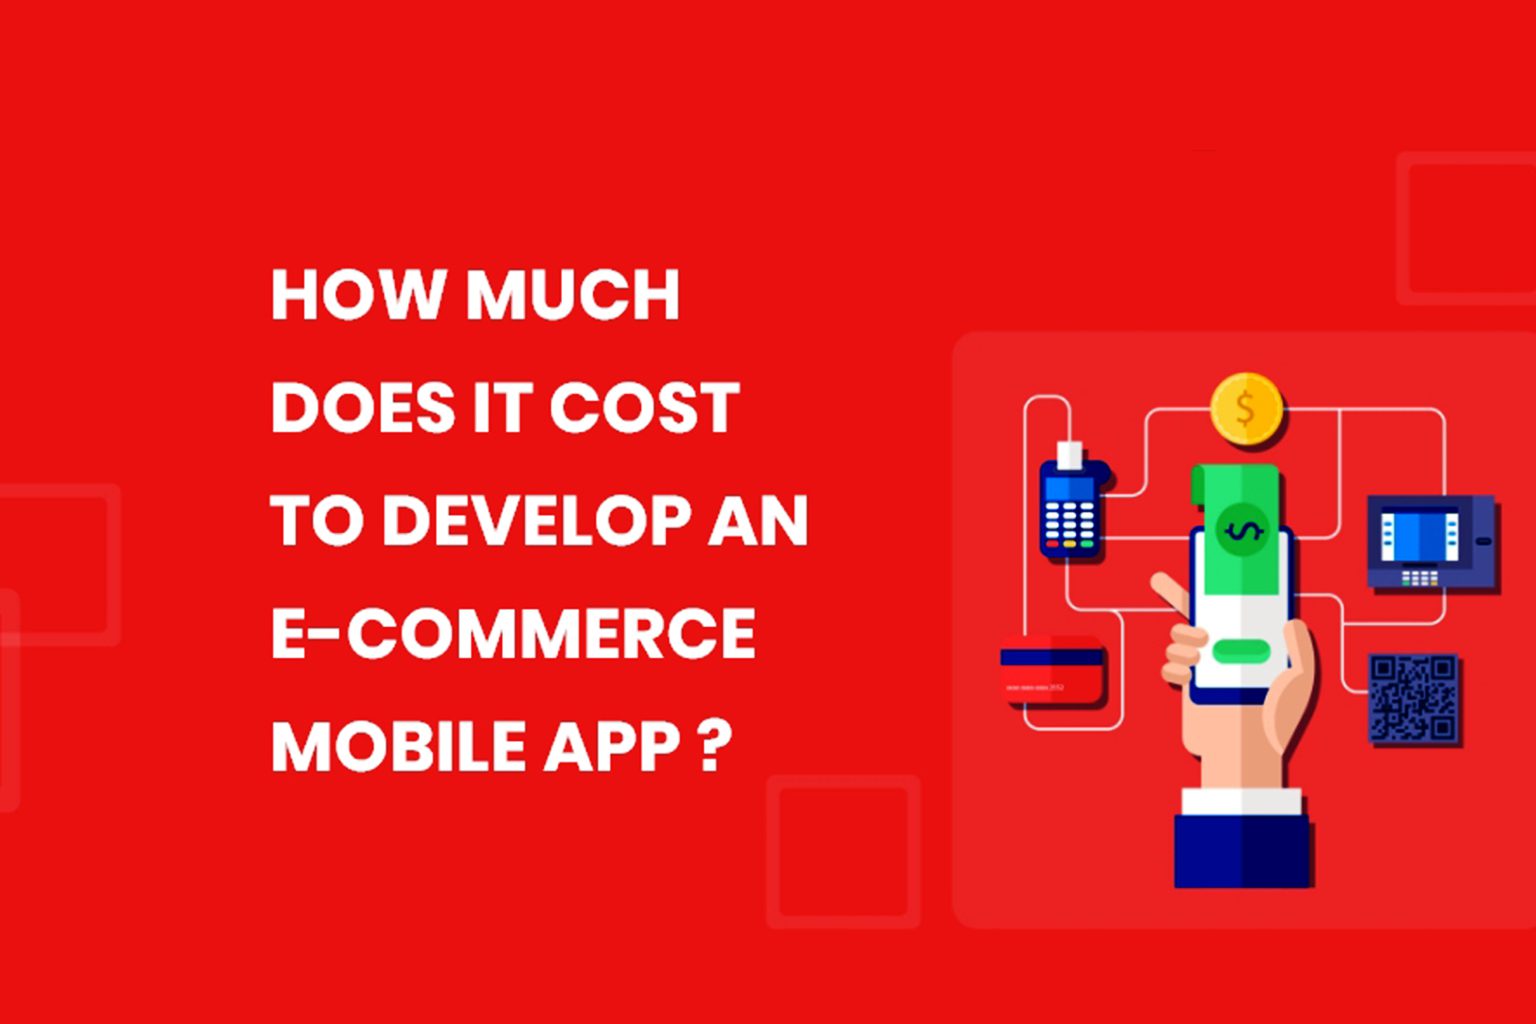 In 2023, how much will an e-commerce app cost